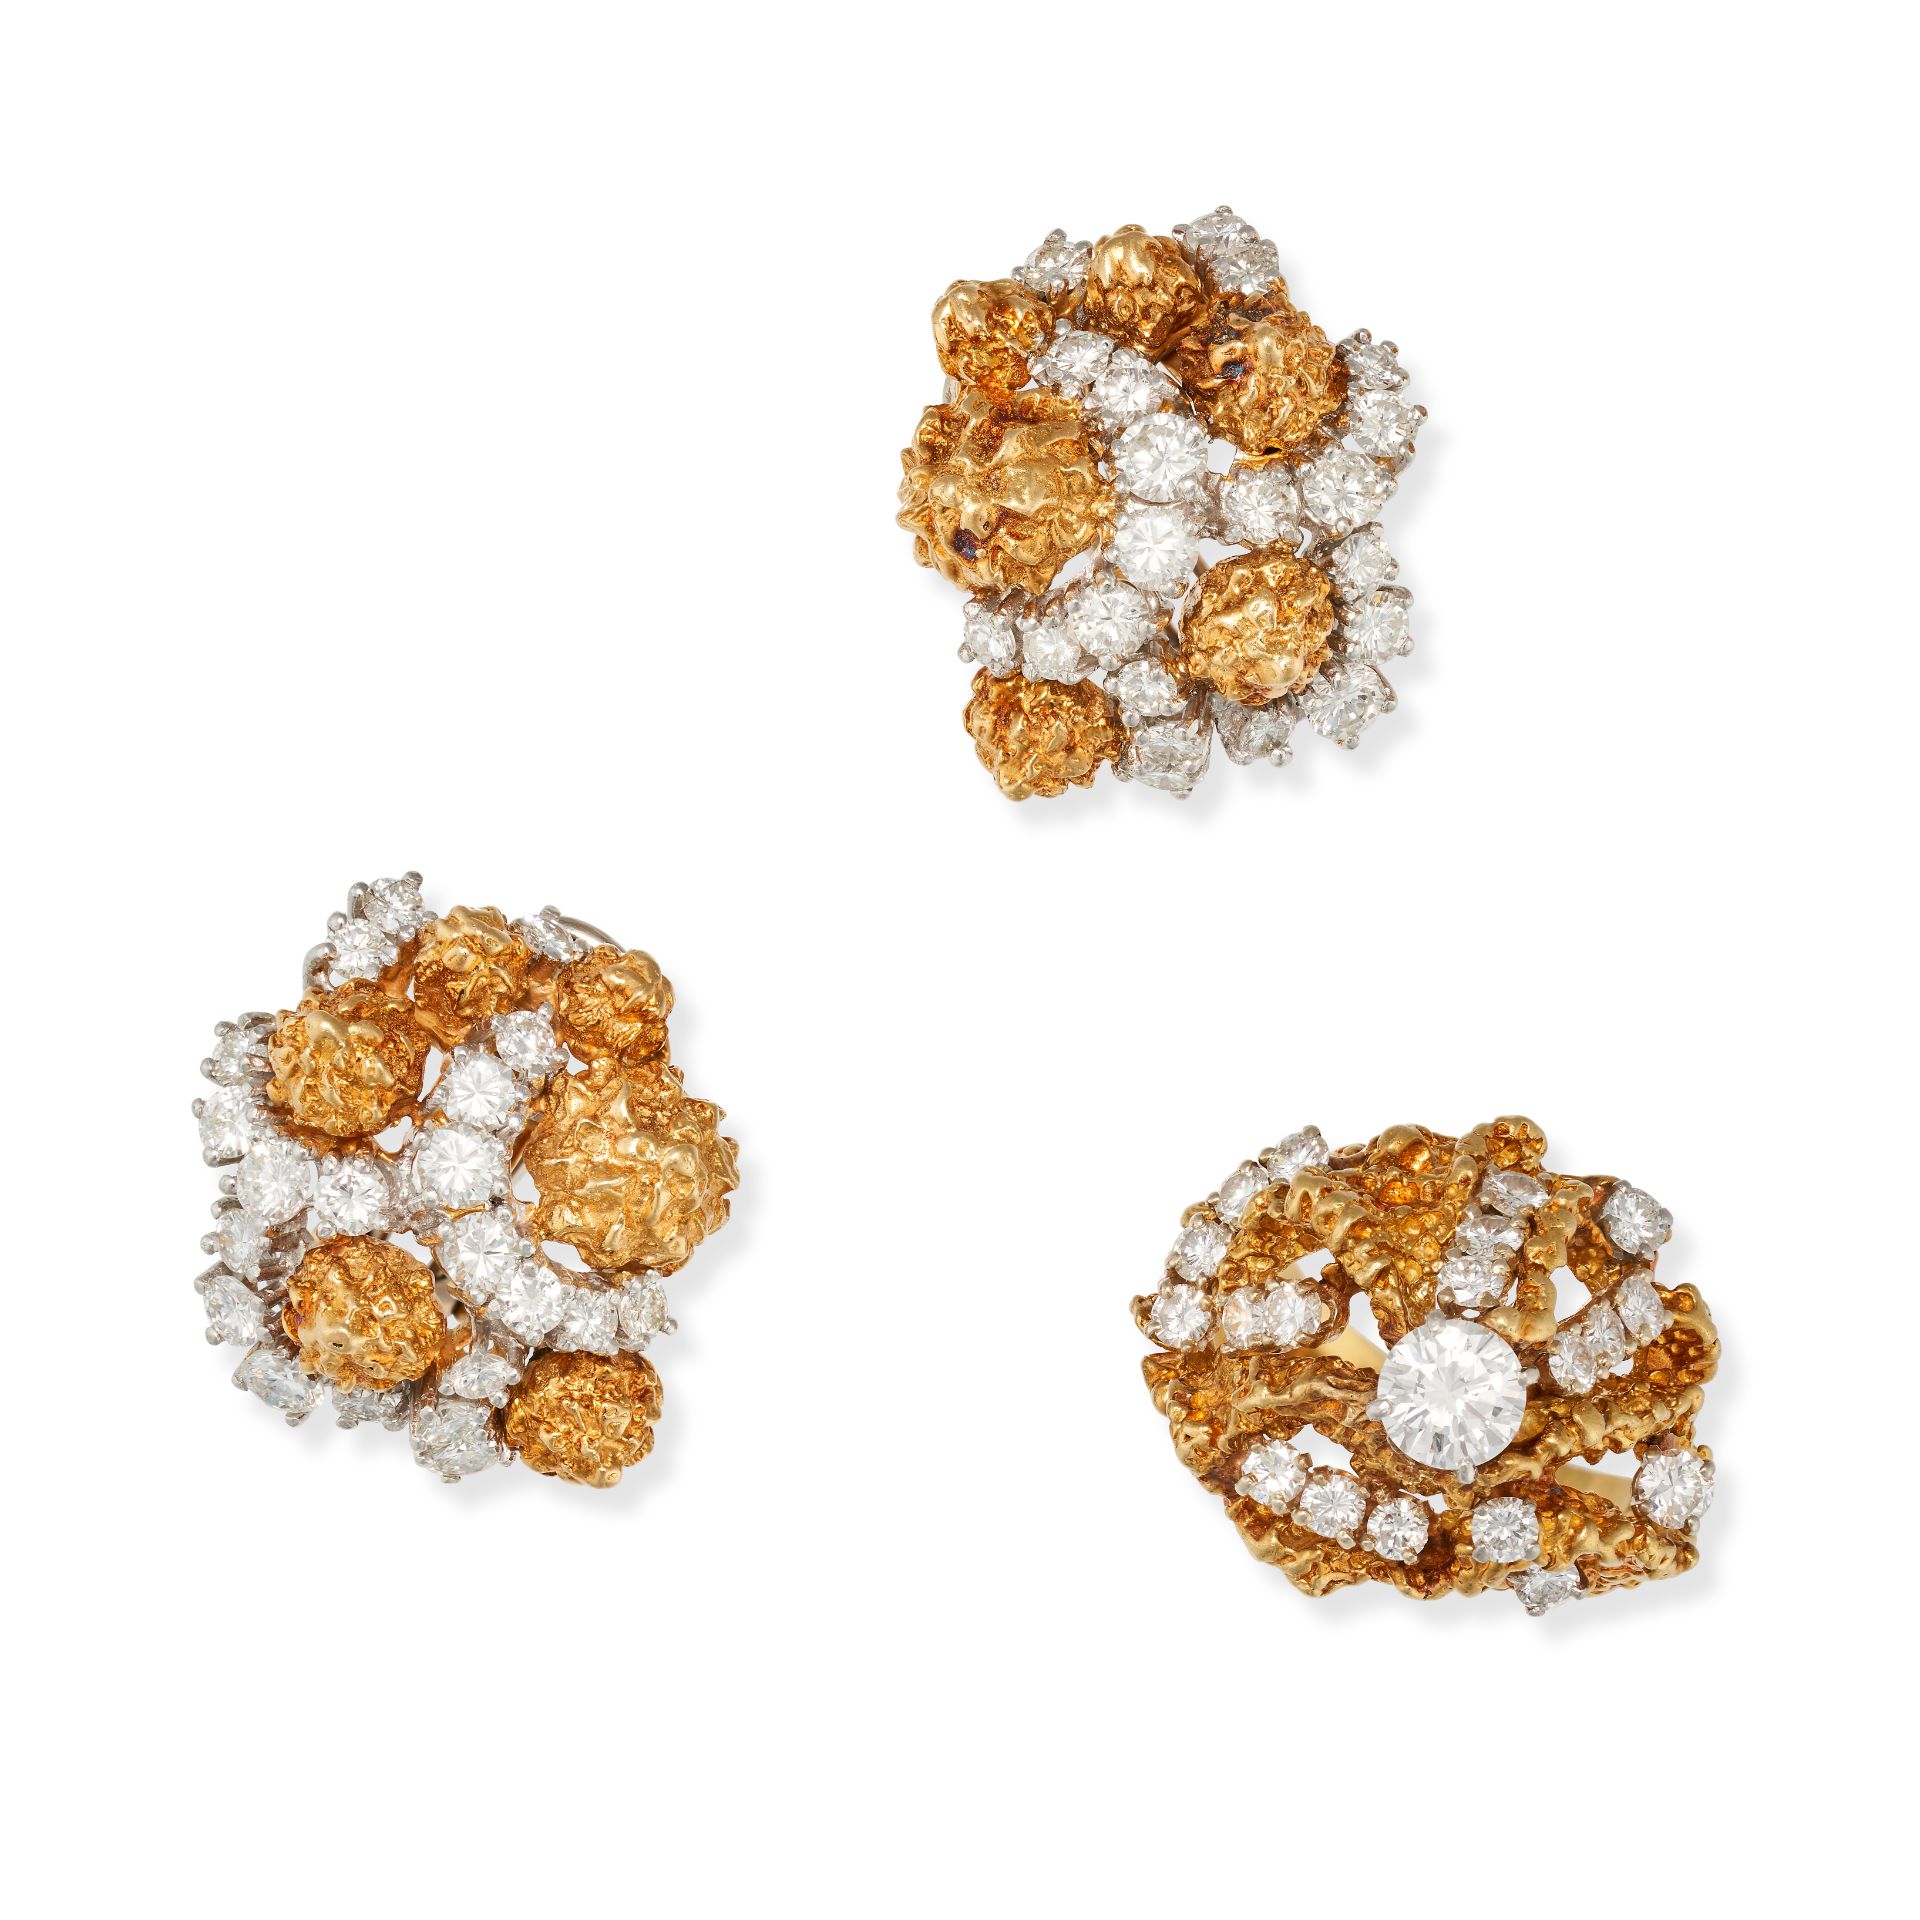 A MODERNIST DIAMOND RING AND EARRINGS SUITE in 18ct white and yellow gold, the ring in a textured...